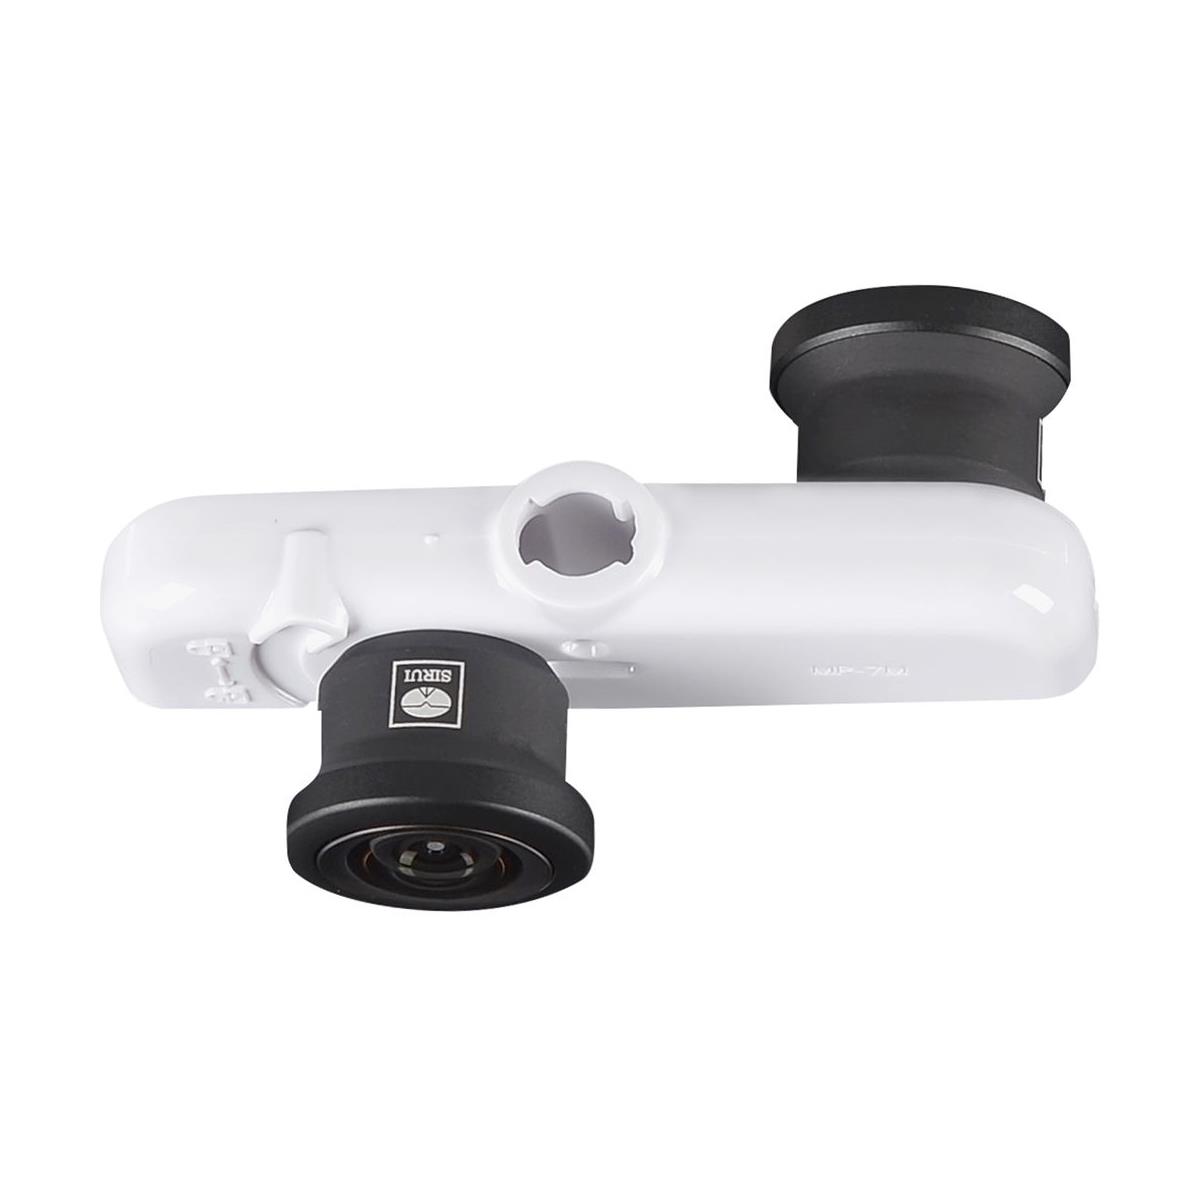 Image of Sirui SUMP-8W360L2 360 Degree Mount Lens Kit for iPhone 8